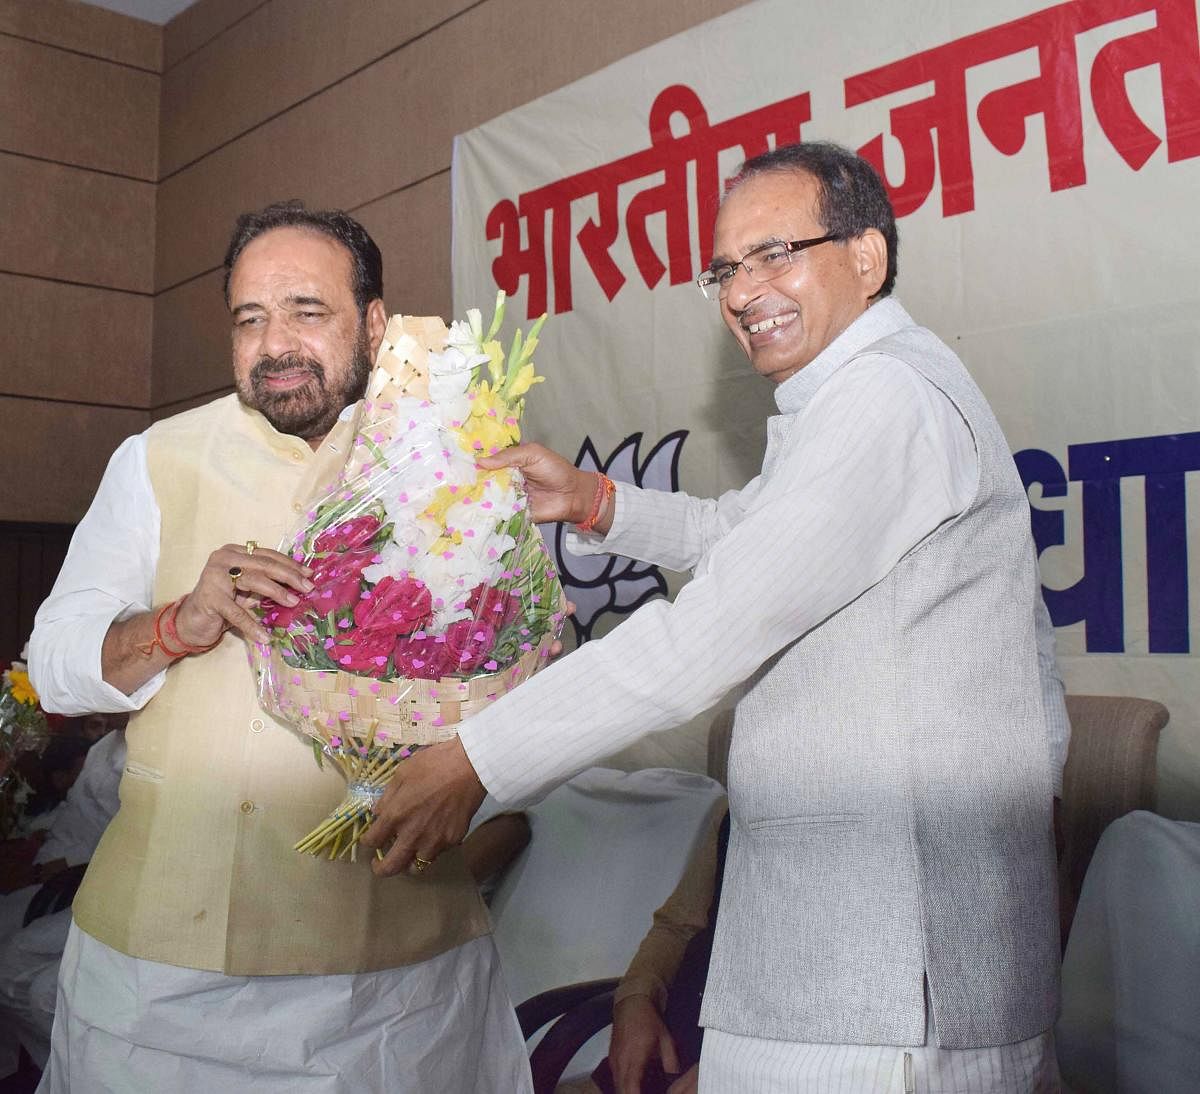 BJP National President Shivraj Singh Chouhan being greeted by party leader Gopal Bhargava during BJP legislature party meeting at BJP State headquarters in Bhopal. (PTI Photo)